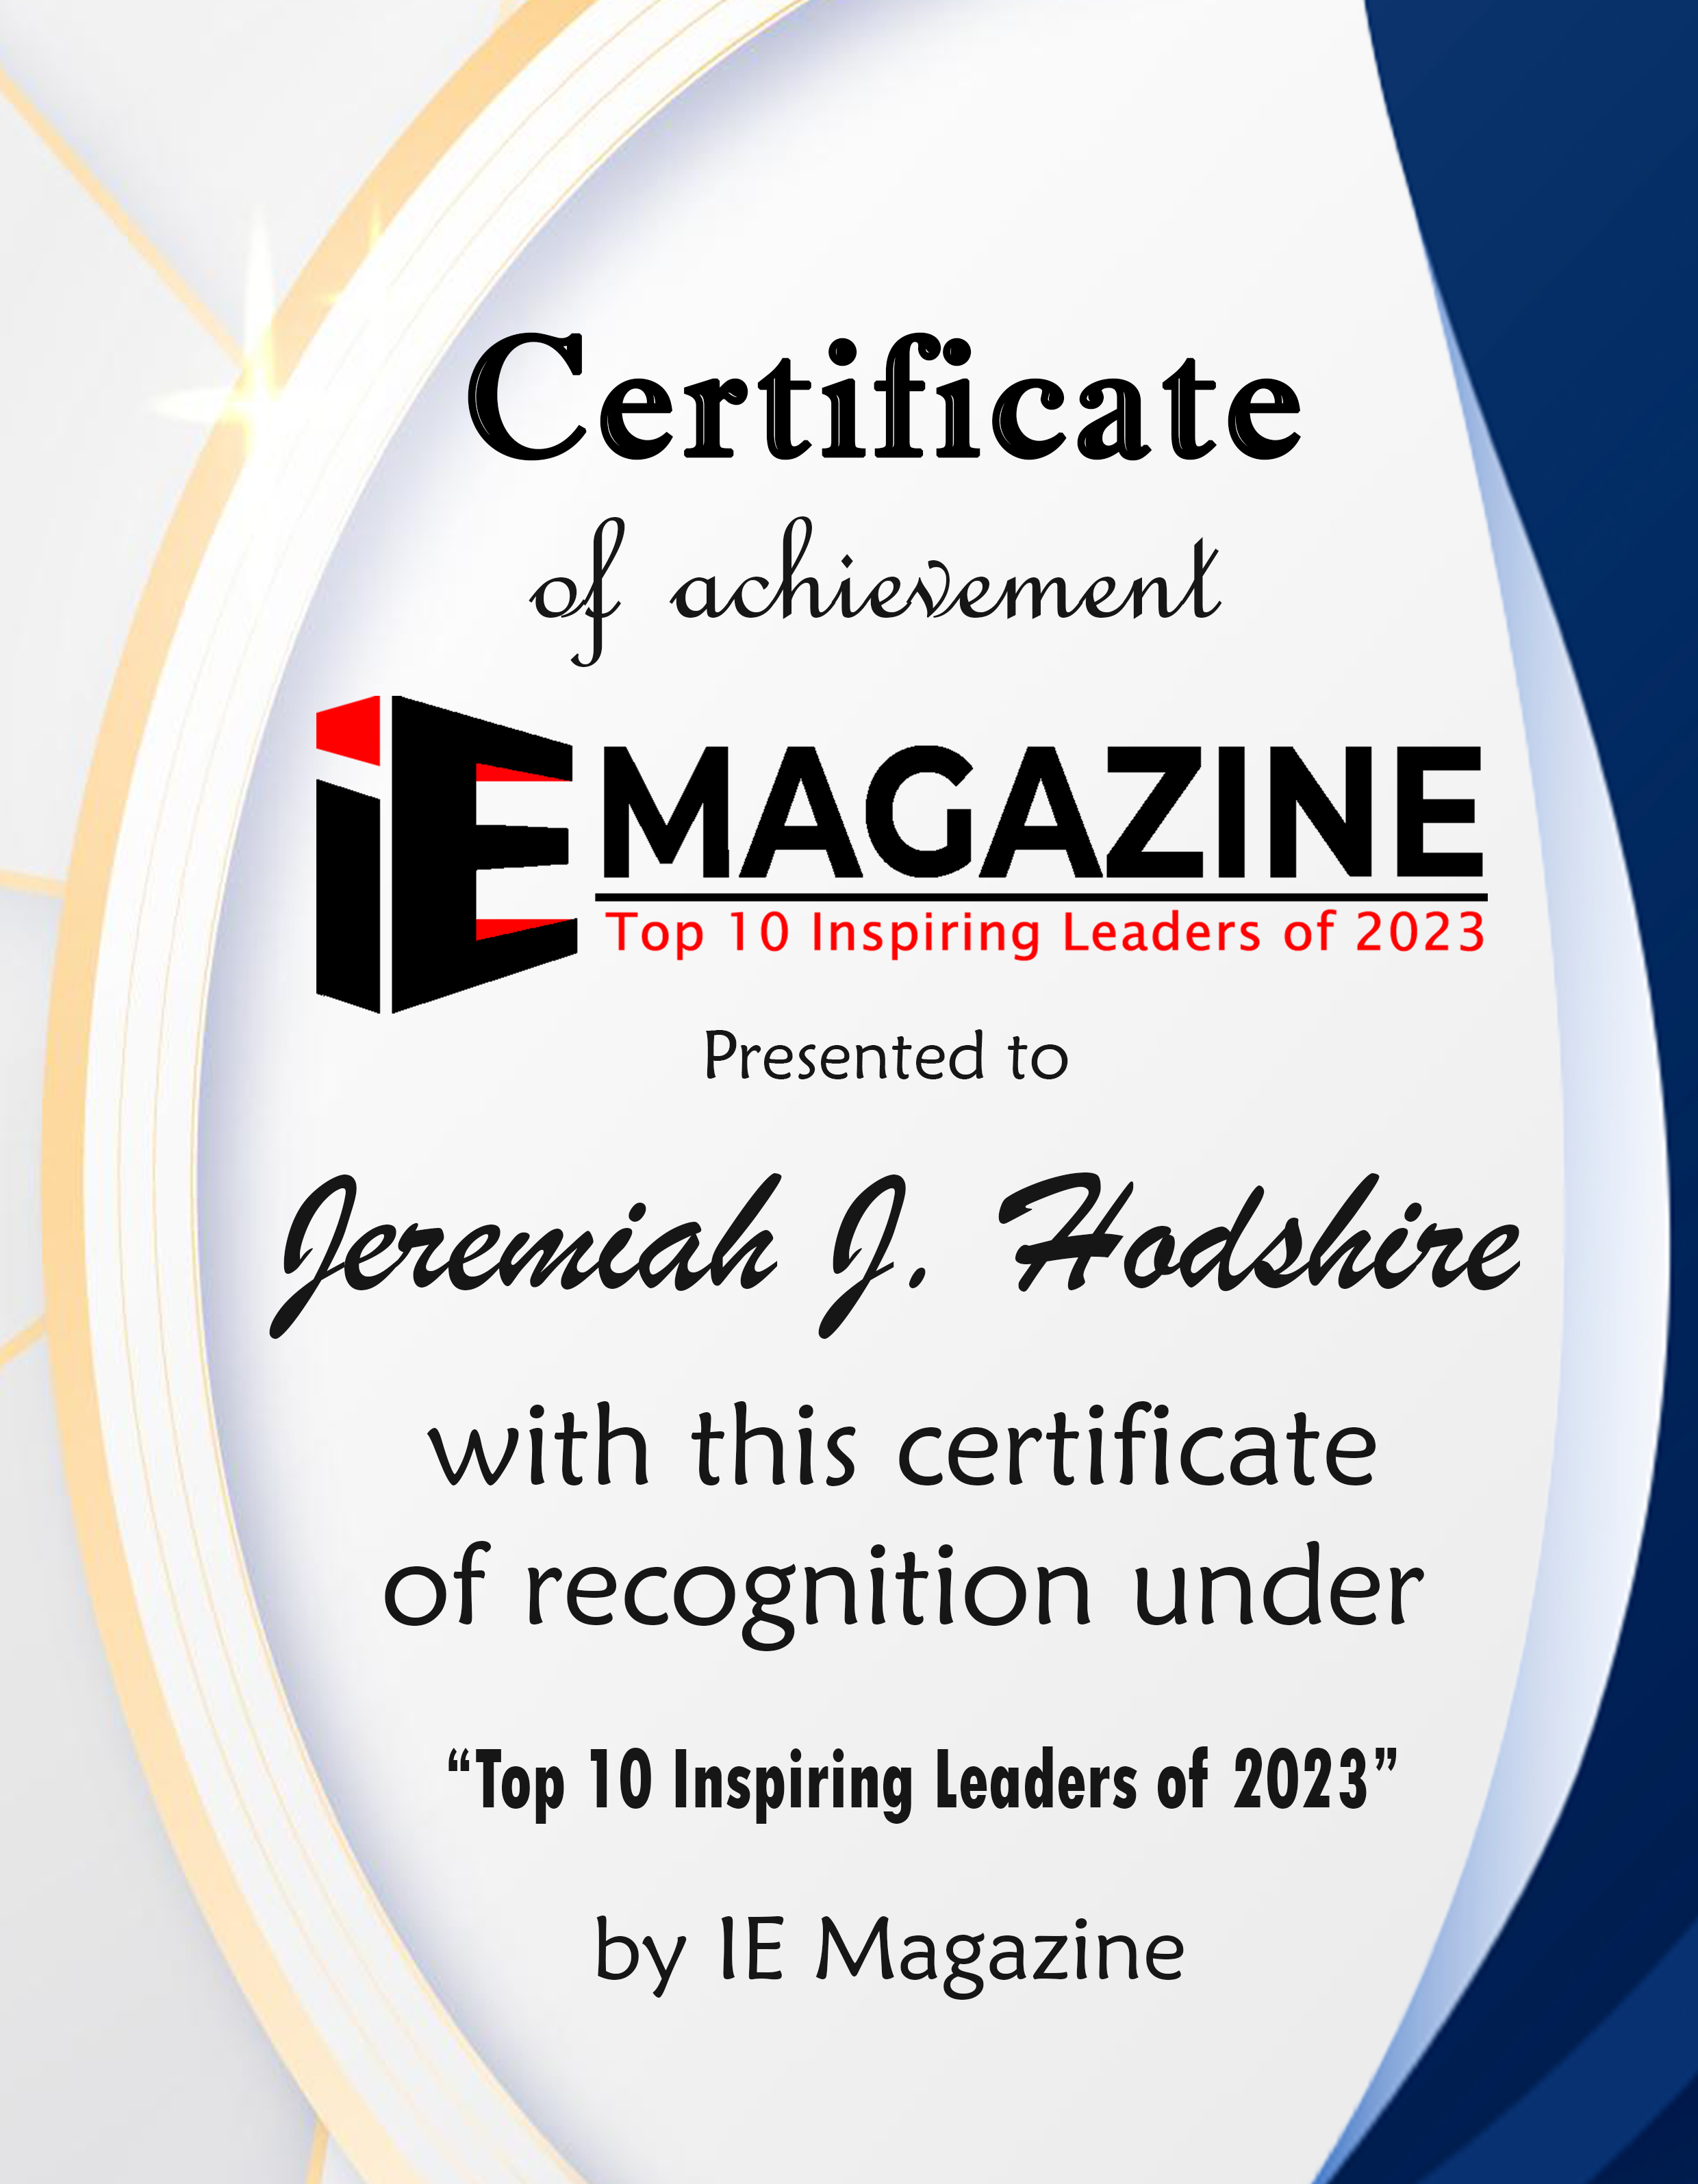 Jeremiah J. Hodshire, President and CEO of Hillsdale Hospital Certificate